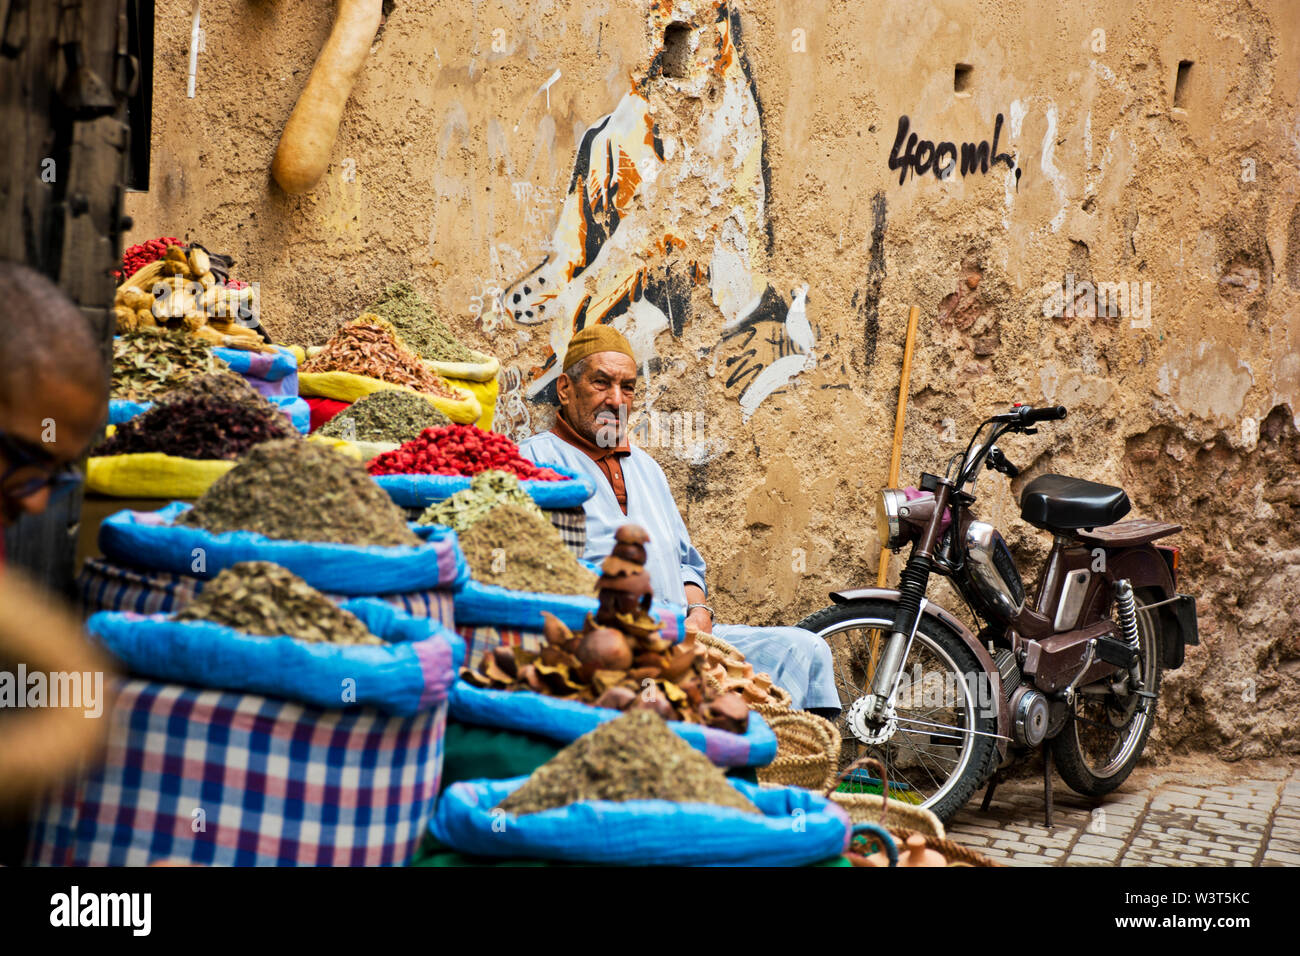 Local Moroccan man selling goods in the streets, alleyways of Marrakech going about daily arabic life in the weathered cultural Medina Stock Photo